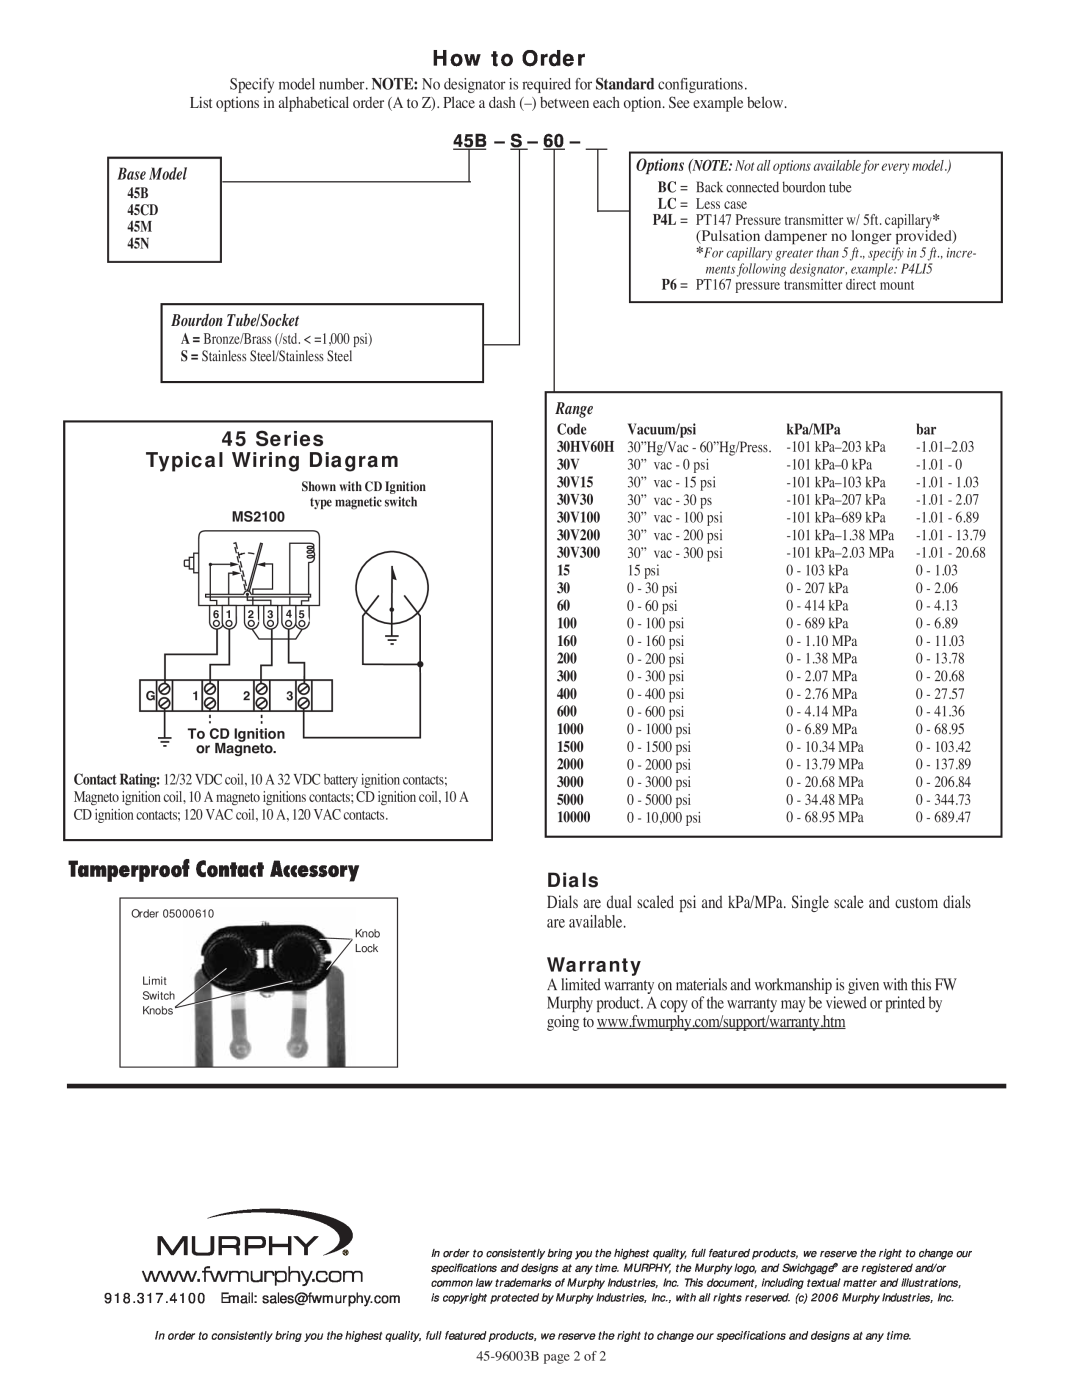 Murphy 45 Series How to Order, 45B - S, Tamperproof Contact Accessory, Series Typical Wiring Diagram, Dials, Warranty 